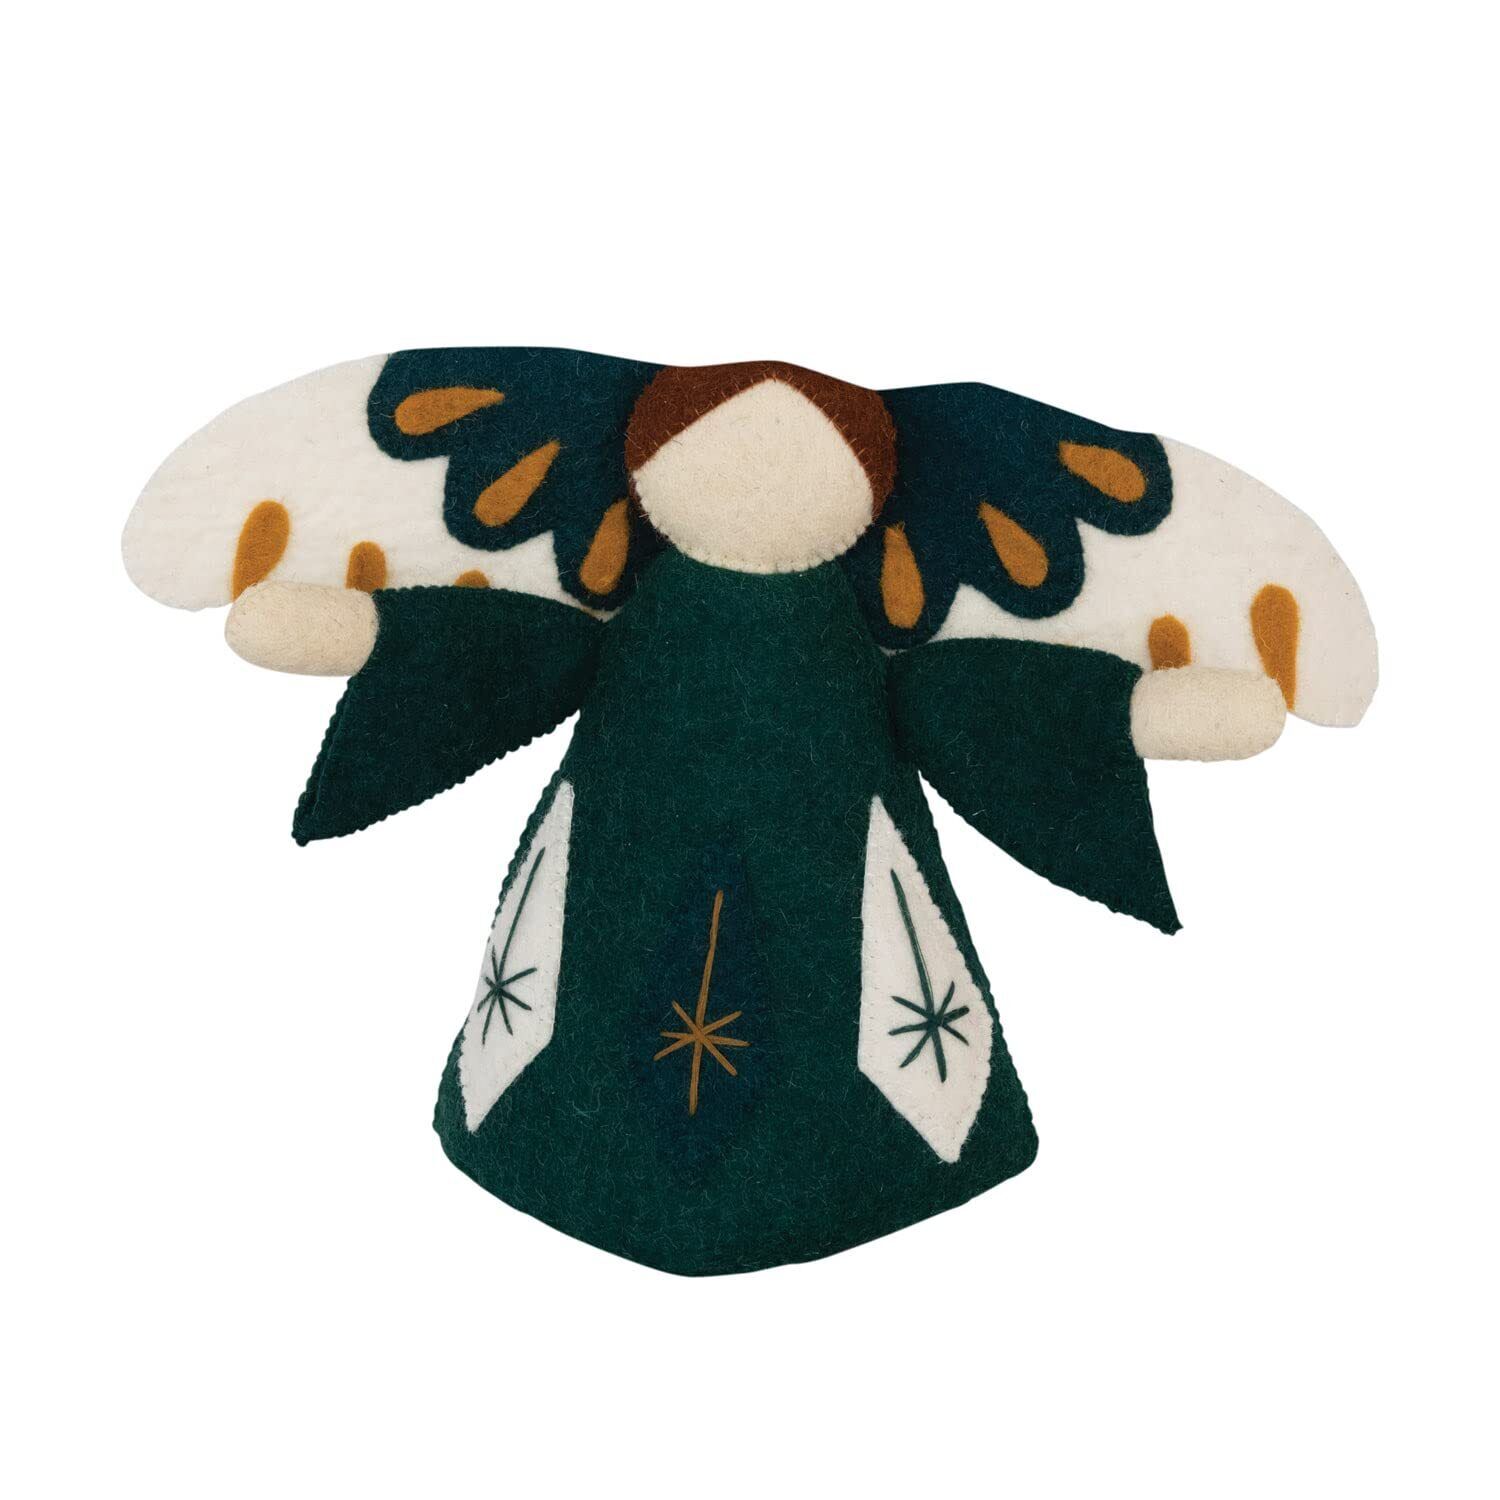 Wool Felt Angel Tree Topper with Embroidery and Applique, Multicolor